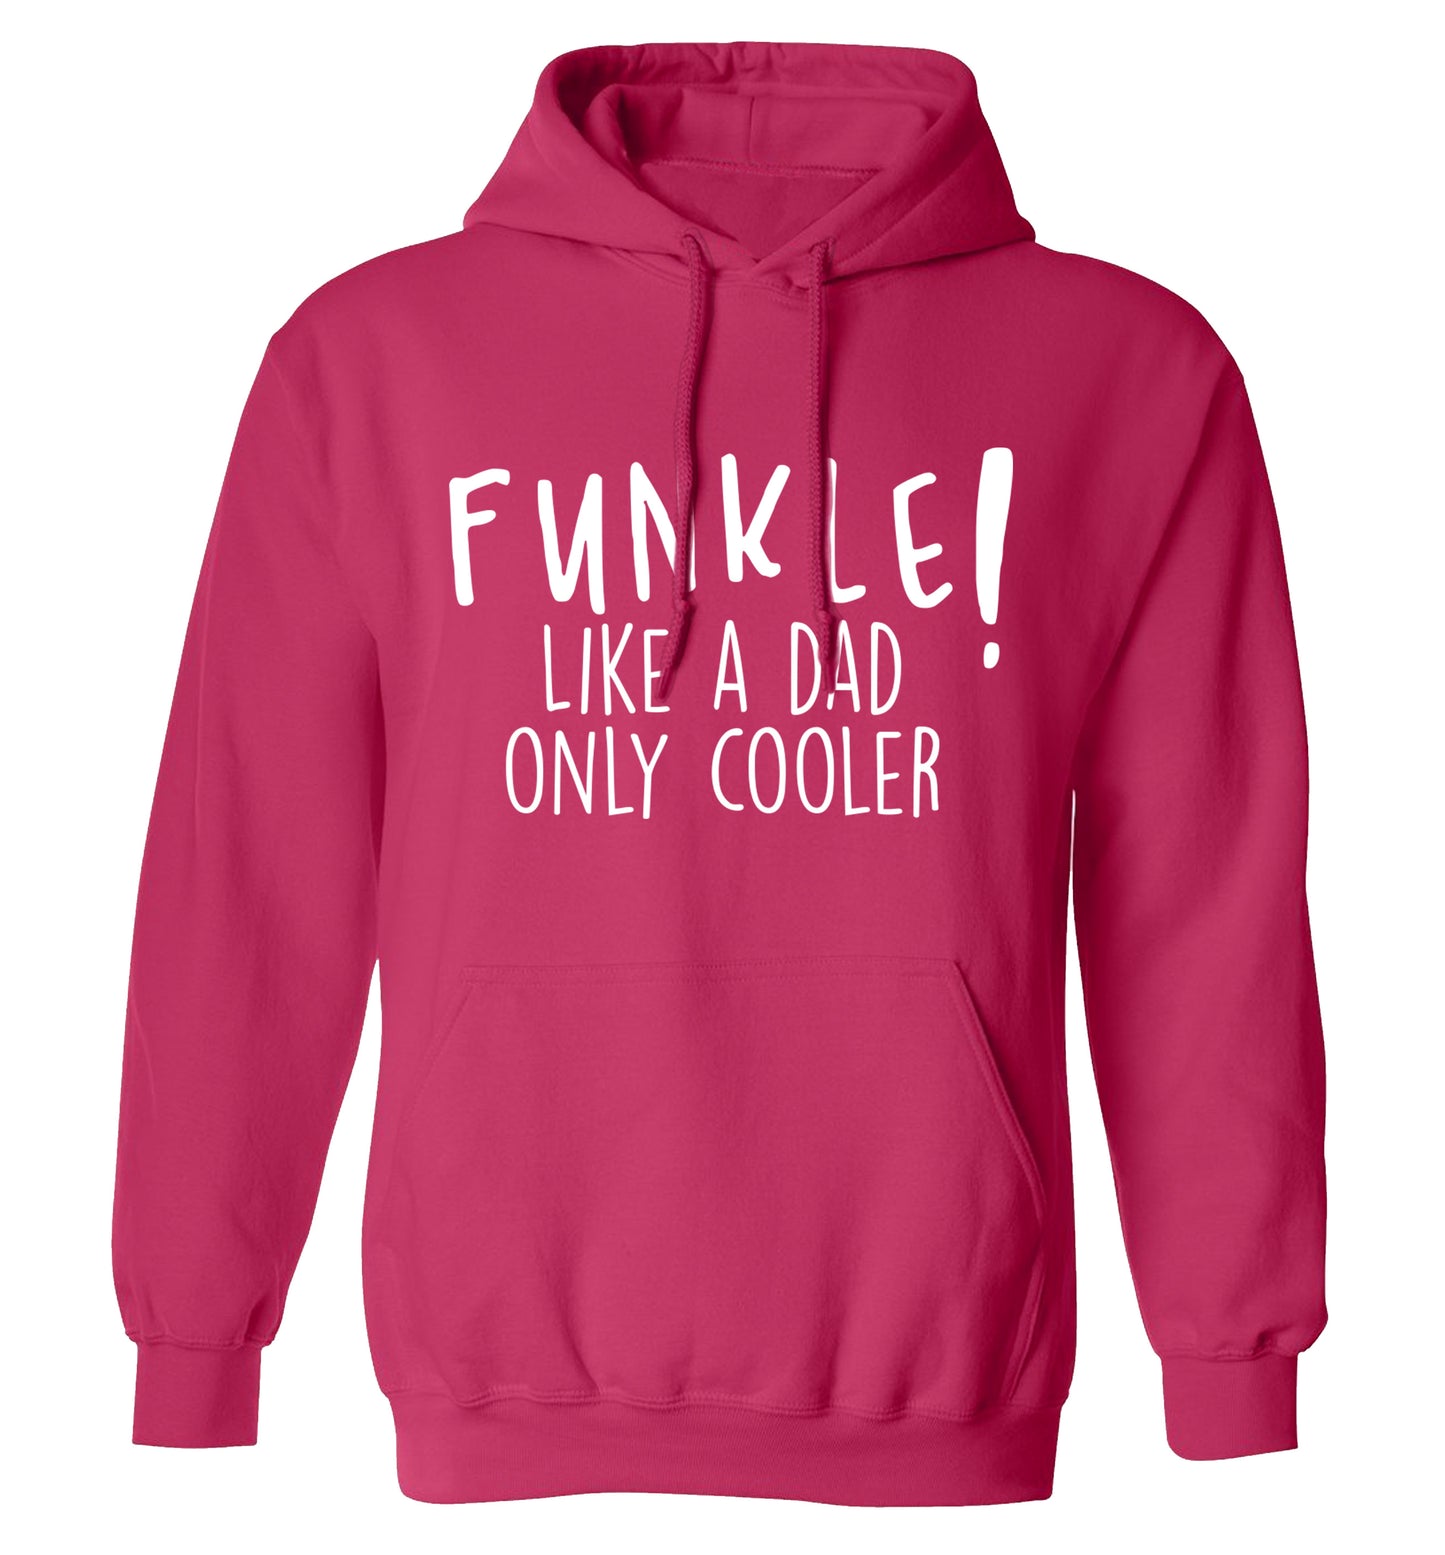 Funkle Like a Dad Only Cooler adults unisex pink hoodie 2XL